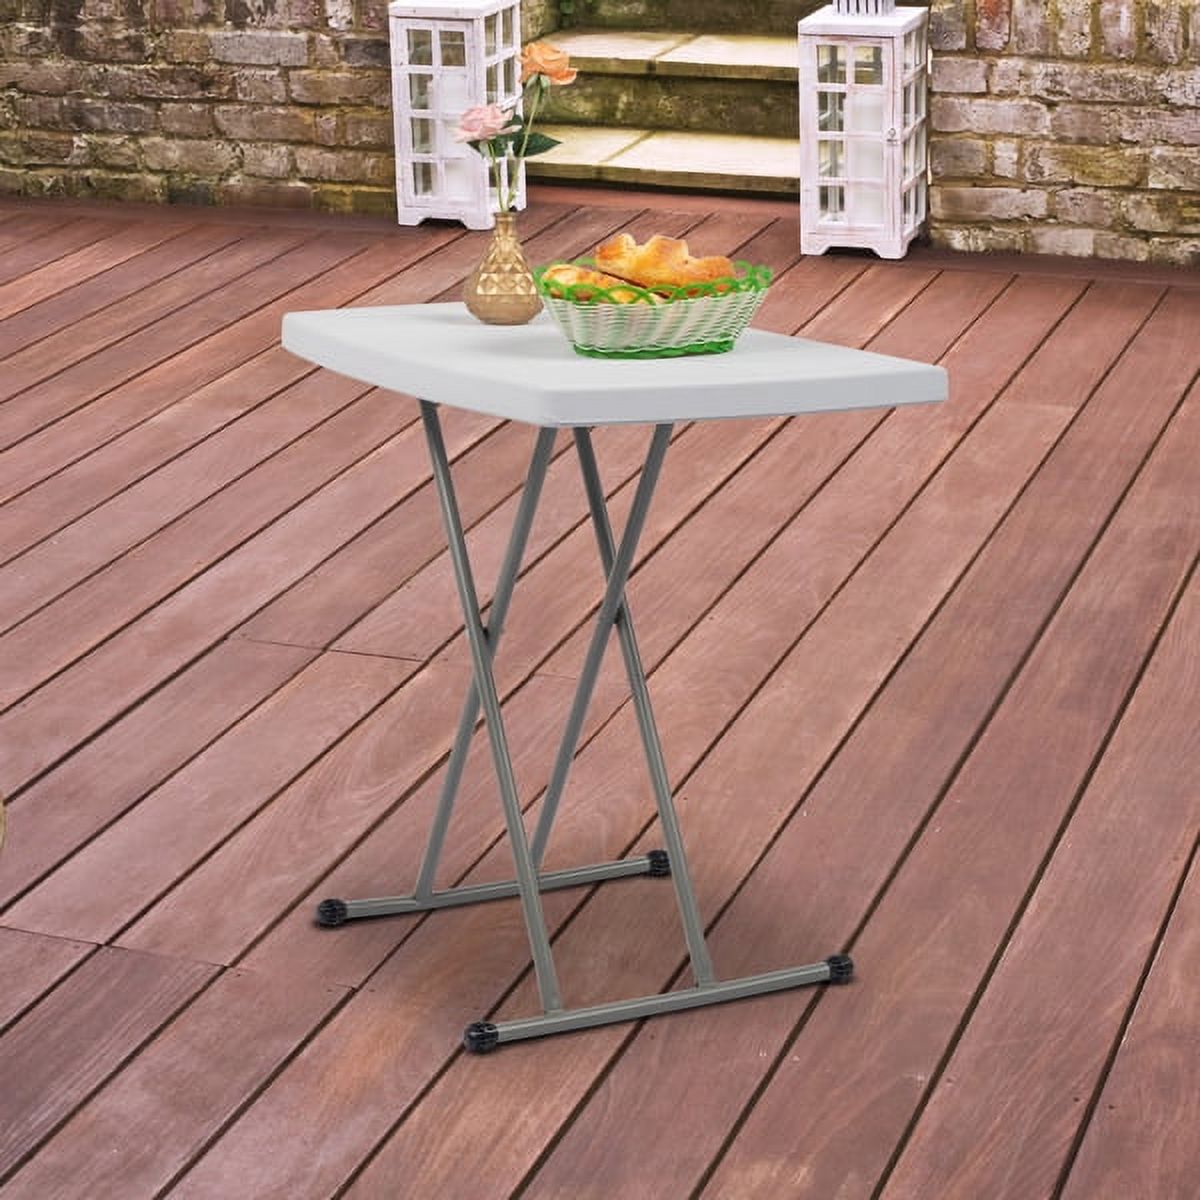 Folding Outdoor Side Table for Living Room, Portable Side End Table for Sofa, Indoor, Outdoor, Camping, Picnics, Balcony, Backyard, Garden, Patio Side Table - image 4 of 9